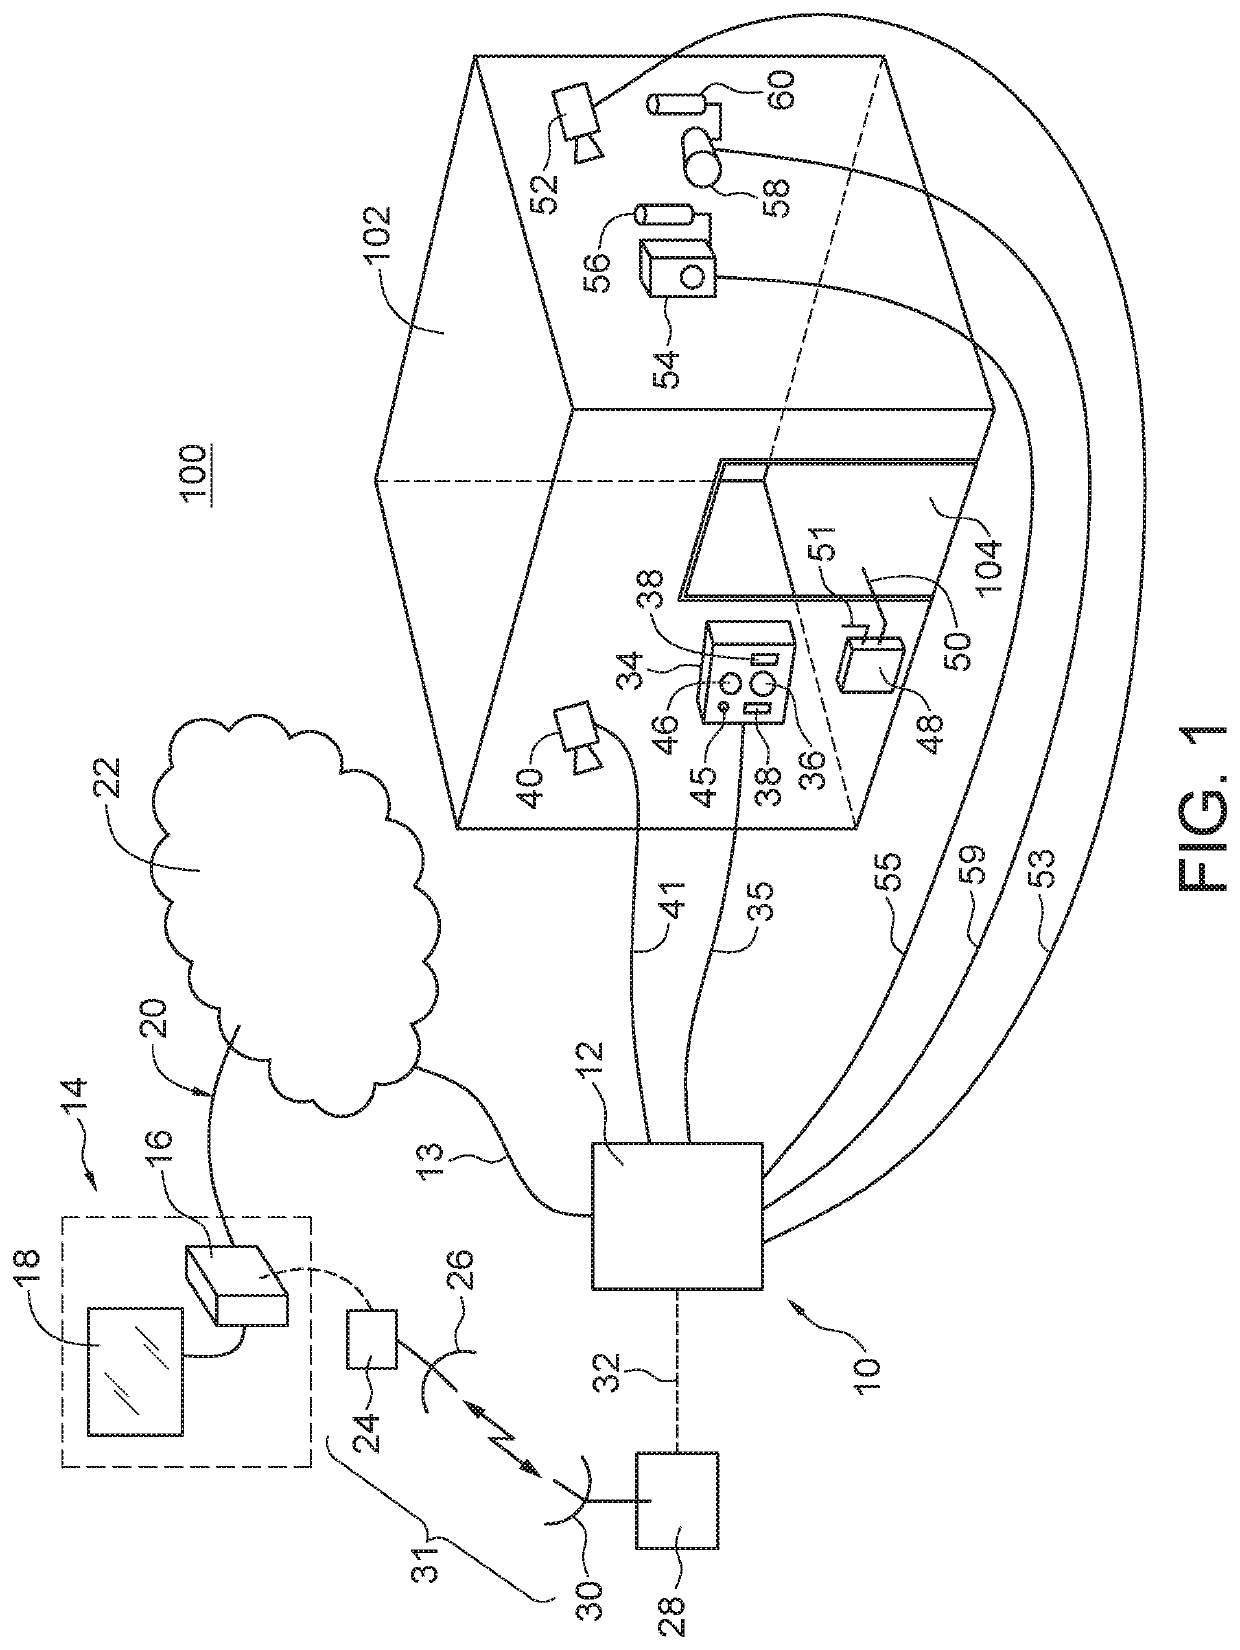 Remote Confined Work Space Monitoring System and Method